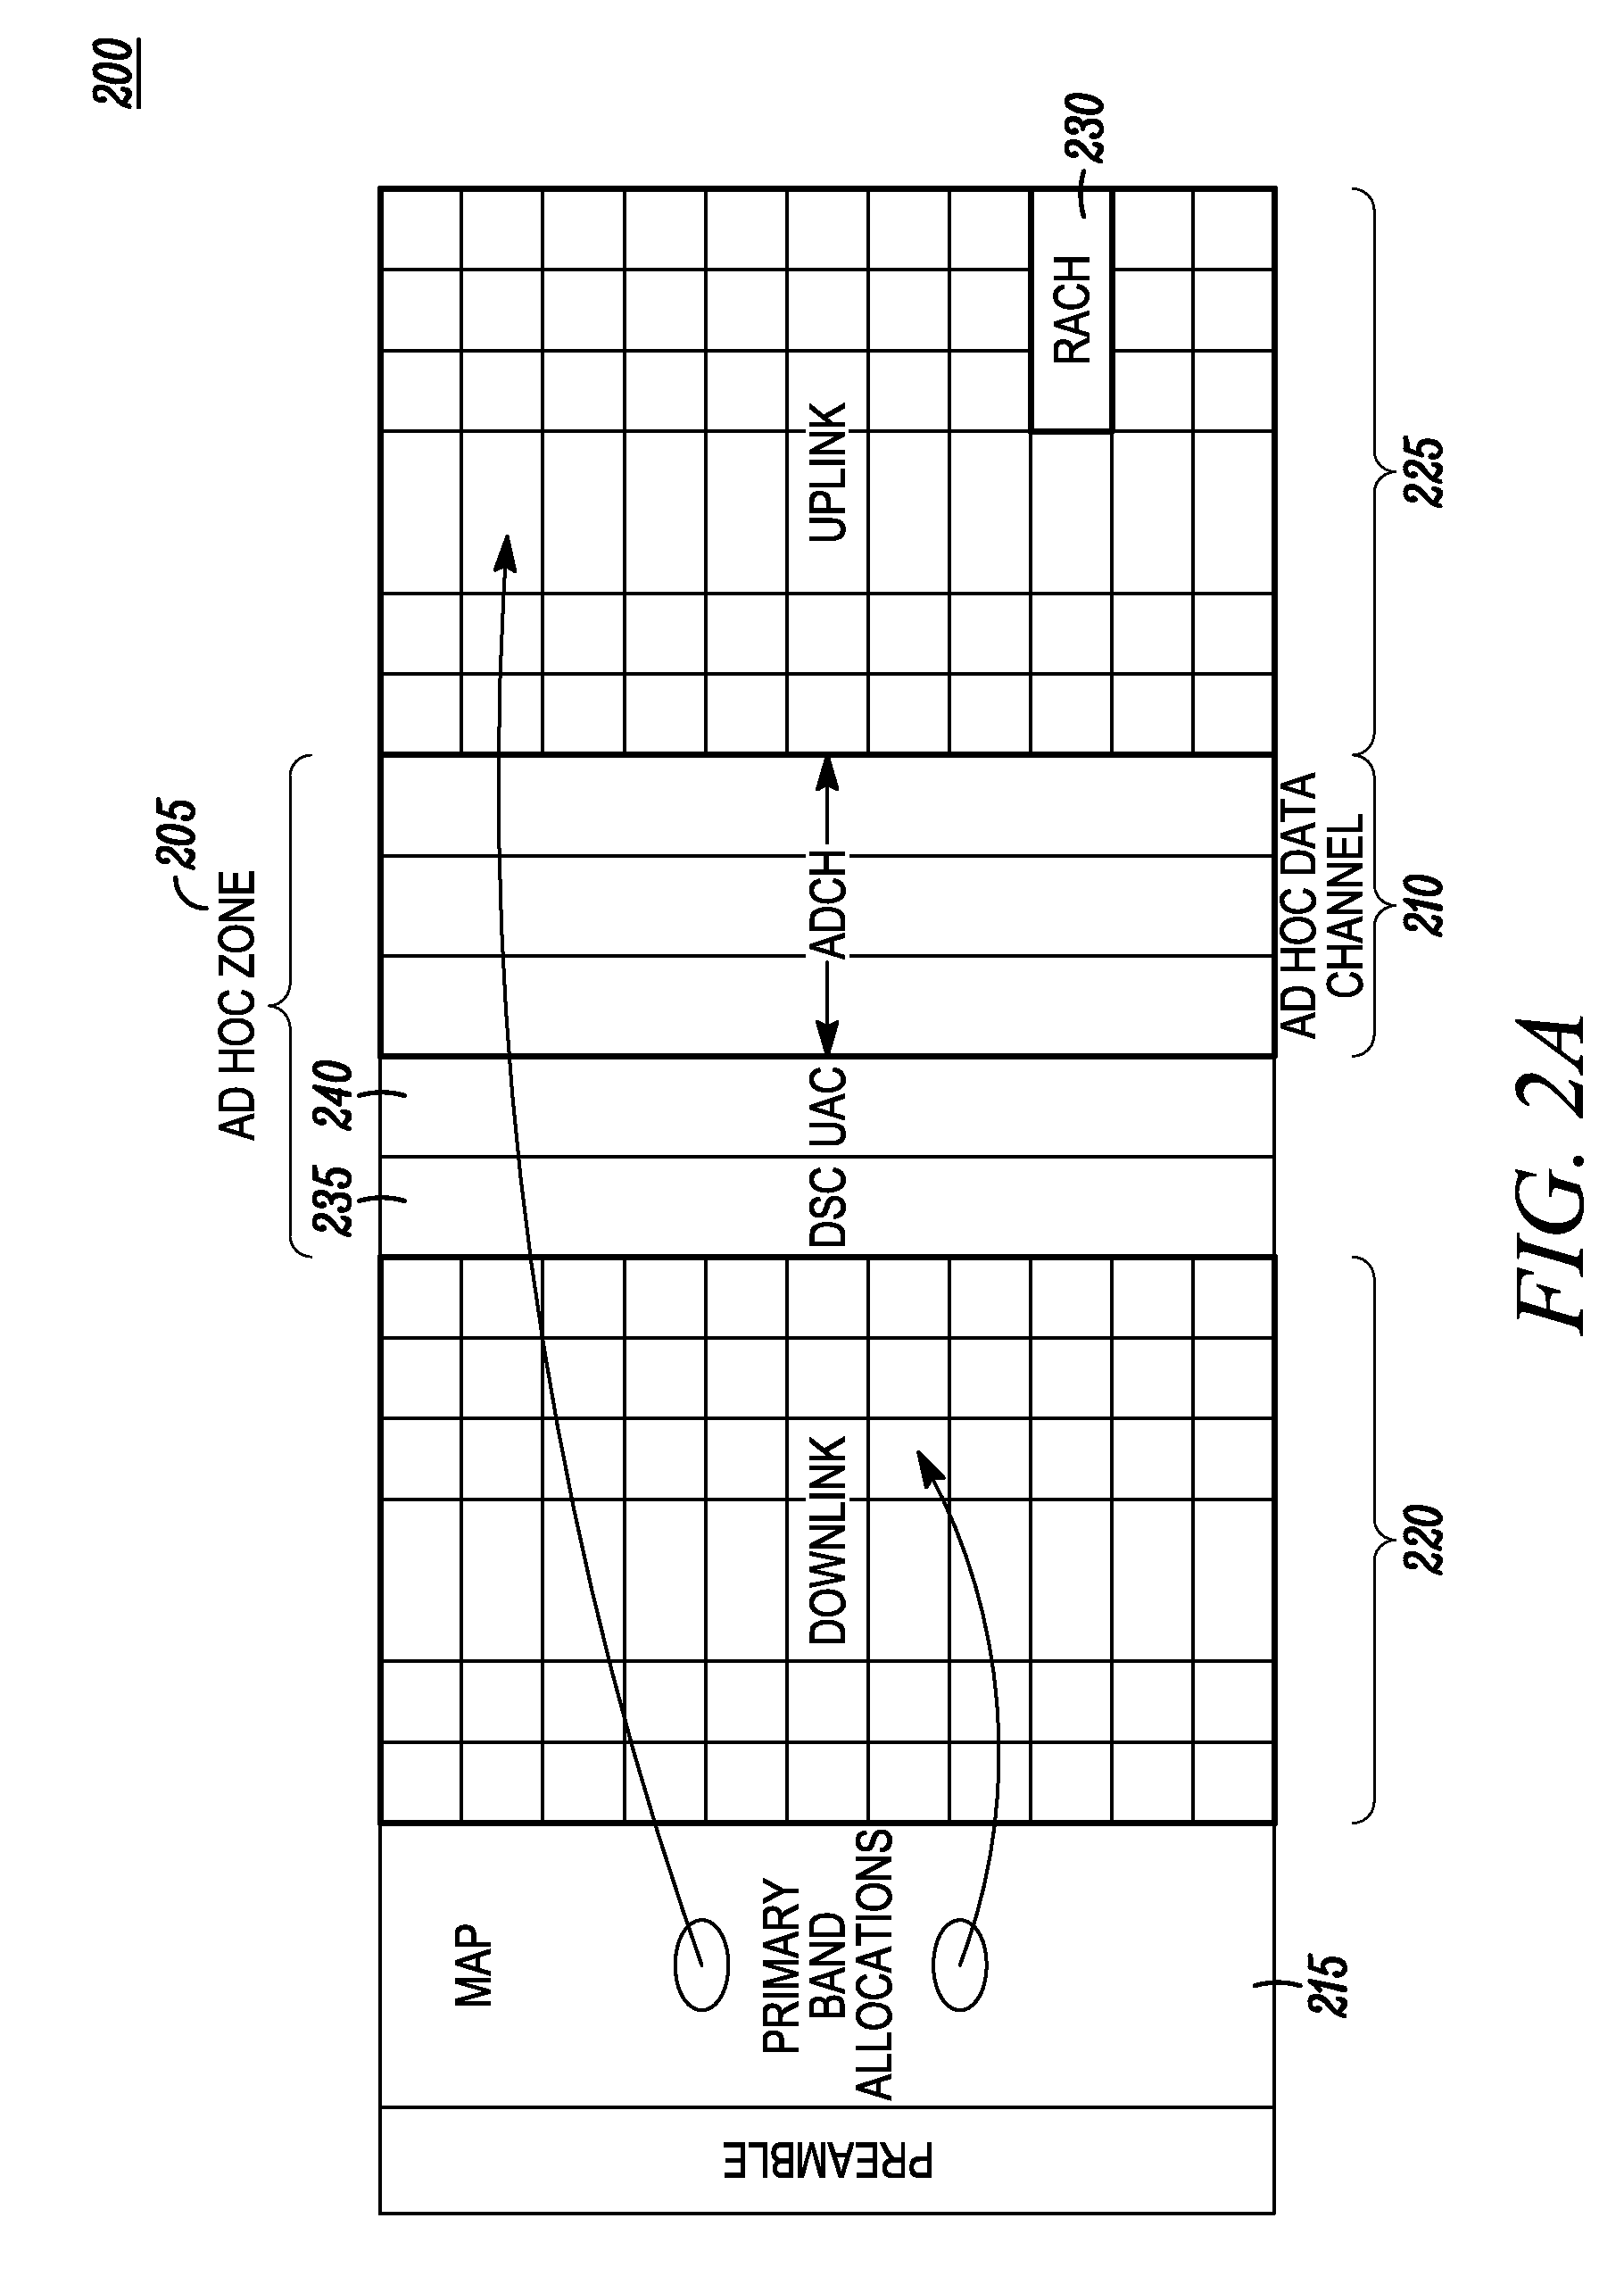 System for enabling mobile coverage extension and peer-to-peer communications in an ad hoc network and method of operation therefor